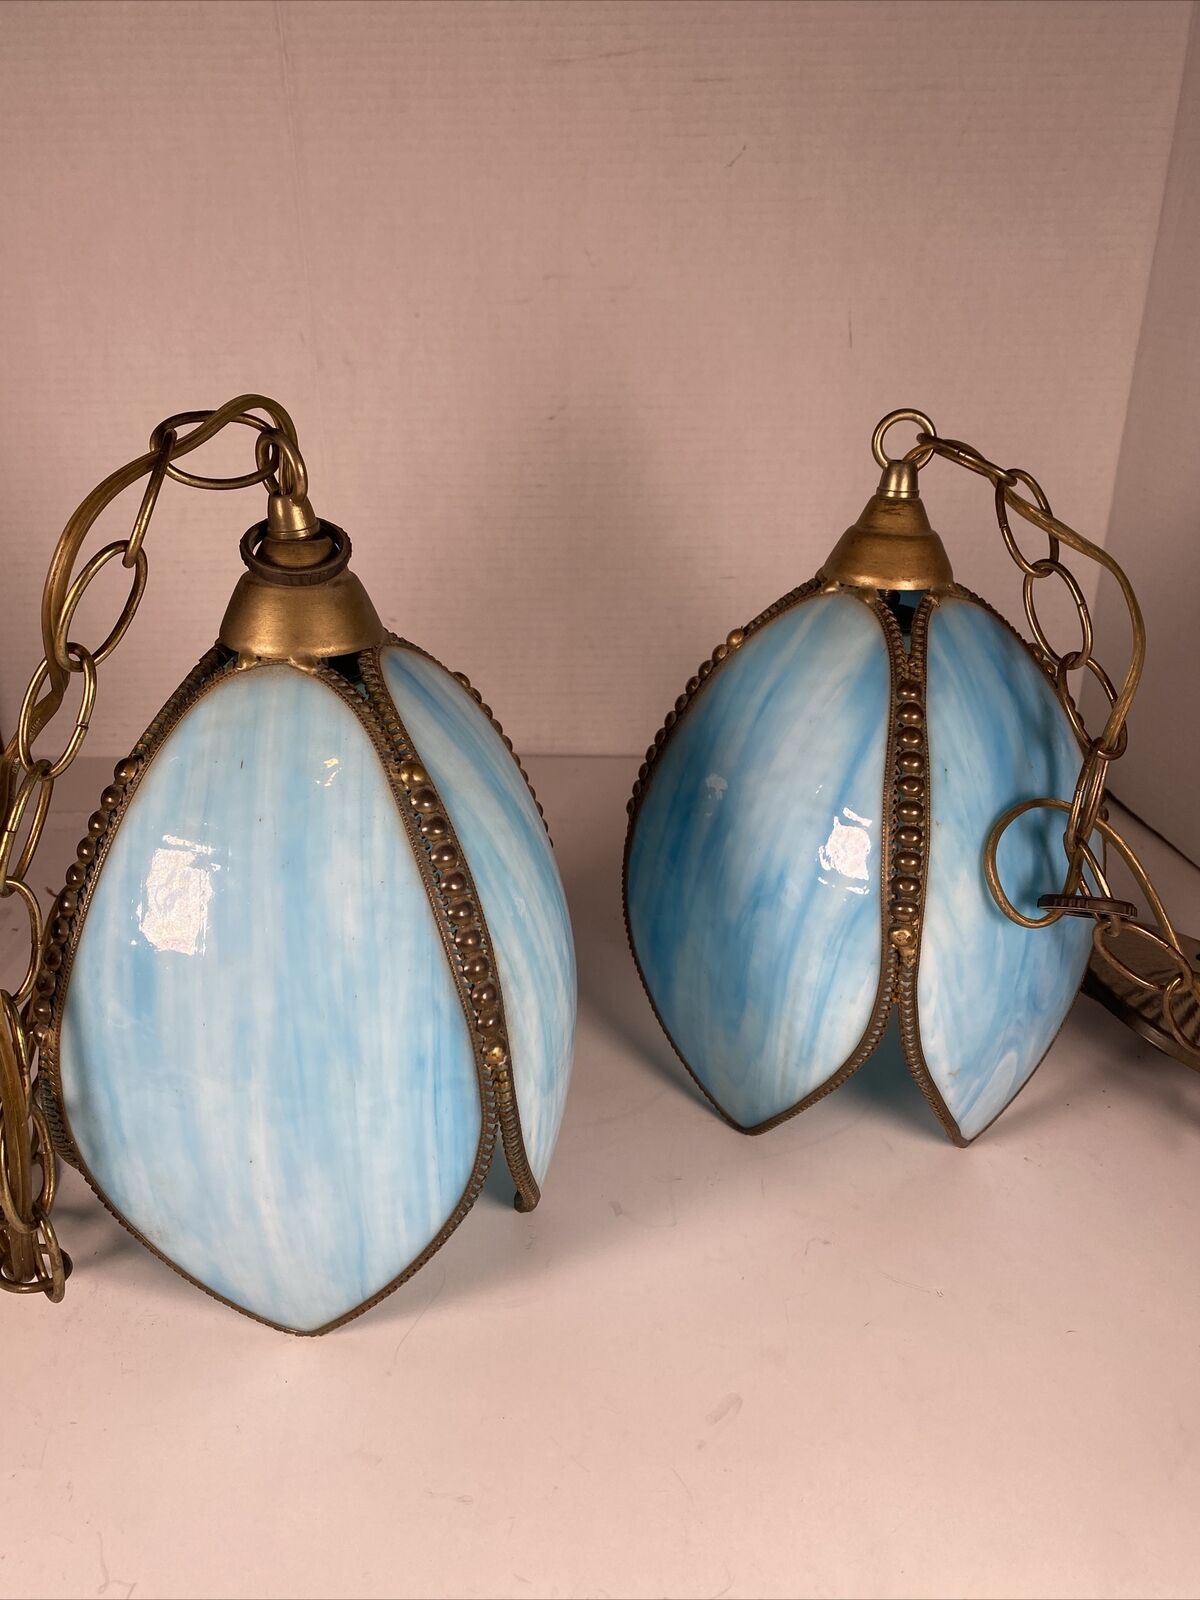 VINTAGE BRASS BEADED TULIP LAMP /  SHADE BLUE GLASS HANGING  9” high